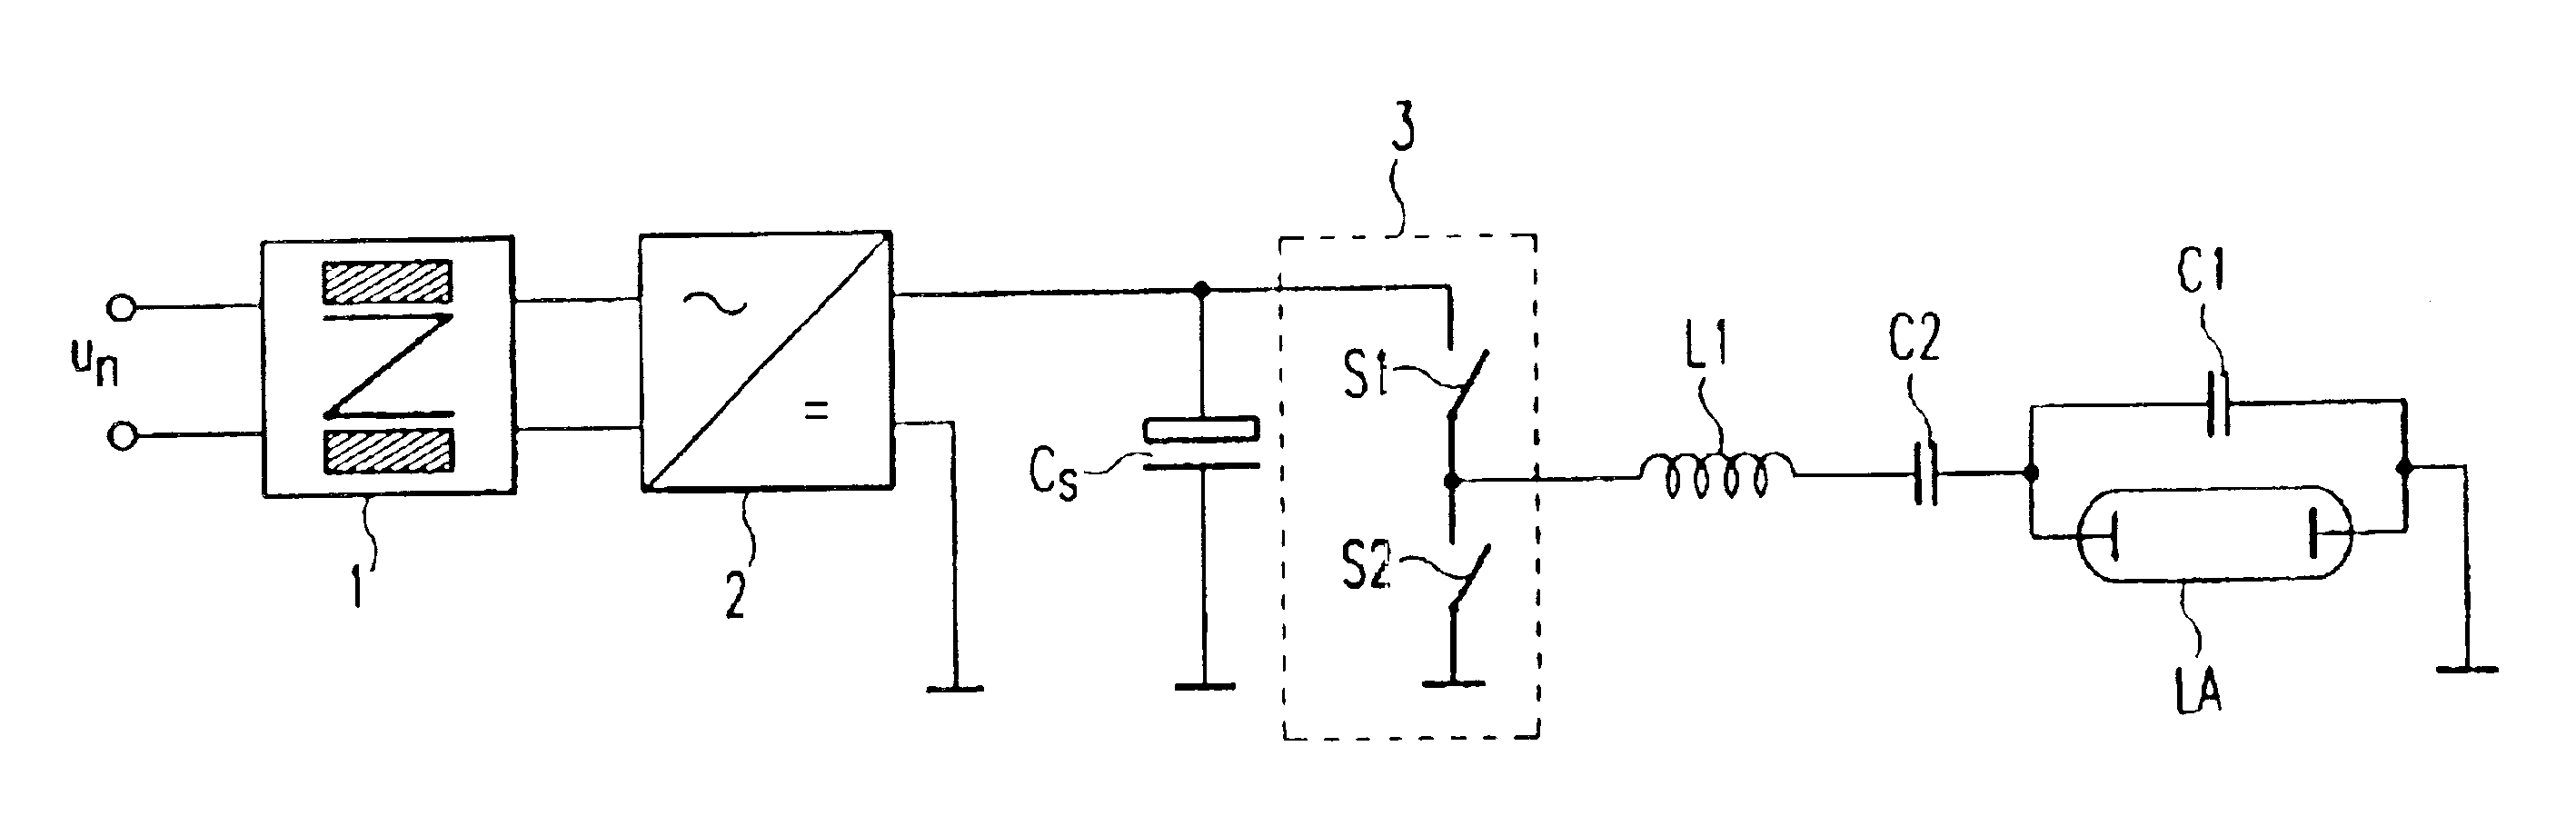 Electronic ballast and electronic transformer